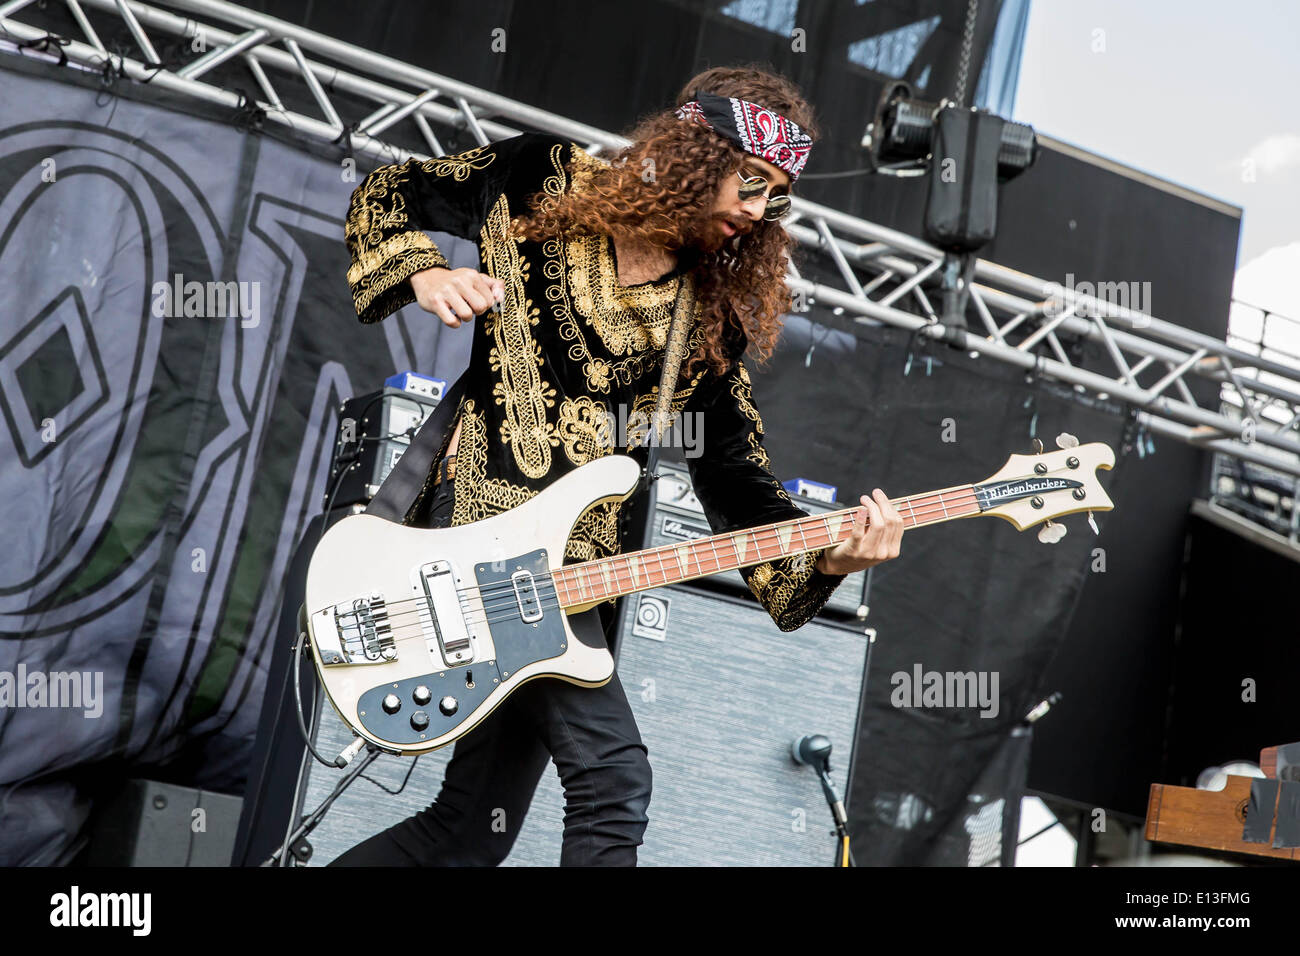 Columbus, Ohio, USA. 20th May, 2014. WOLFMOTHER performs on day three of the 2014 Rock On The Range Festival at Crew Stadium in Columbus Ohio on May 18th 2014 © Marc Nader/ZUMA Wire/ZUMAPRESS.com/Alamy Live News Stock Photo